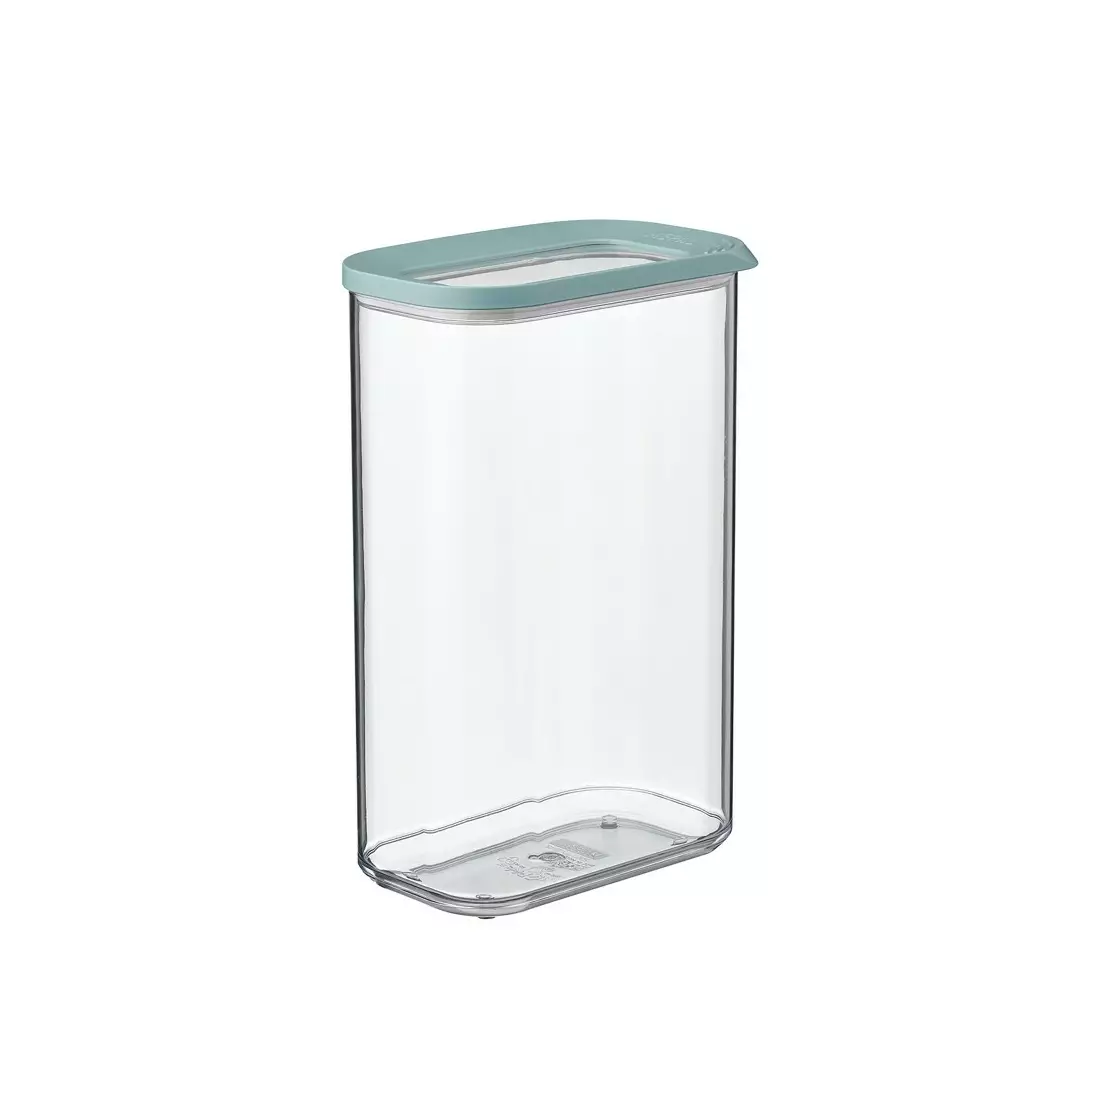 Mepal Modula food container 2000ml, Green